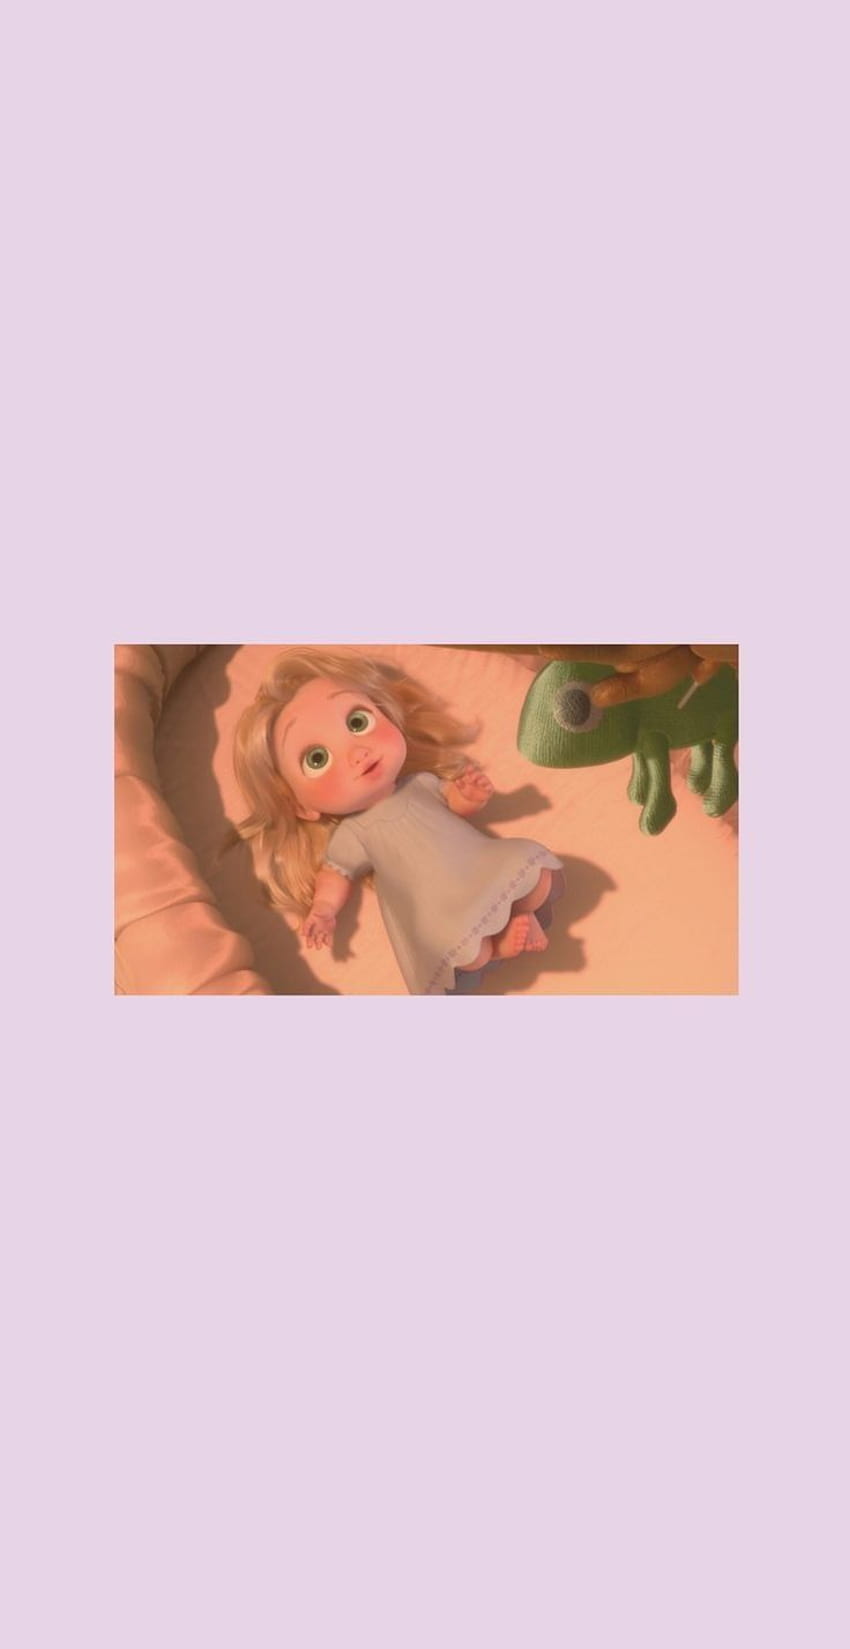 A little girl laying in her bed with an animal - Rapunzel